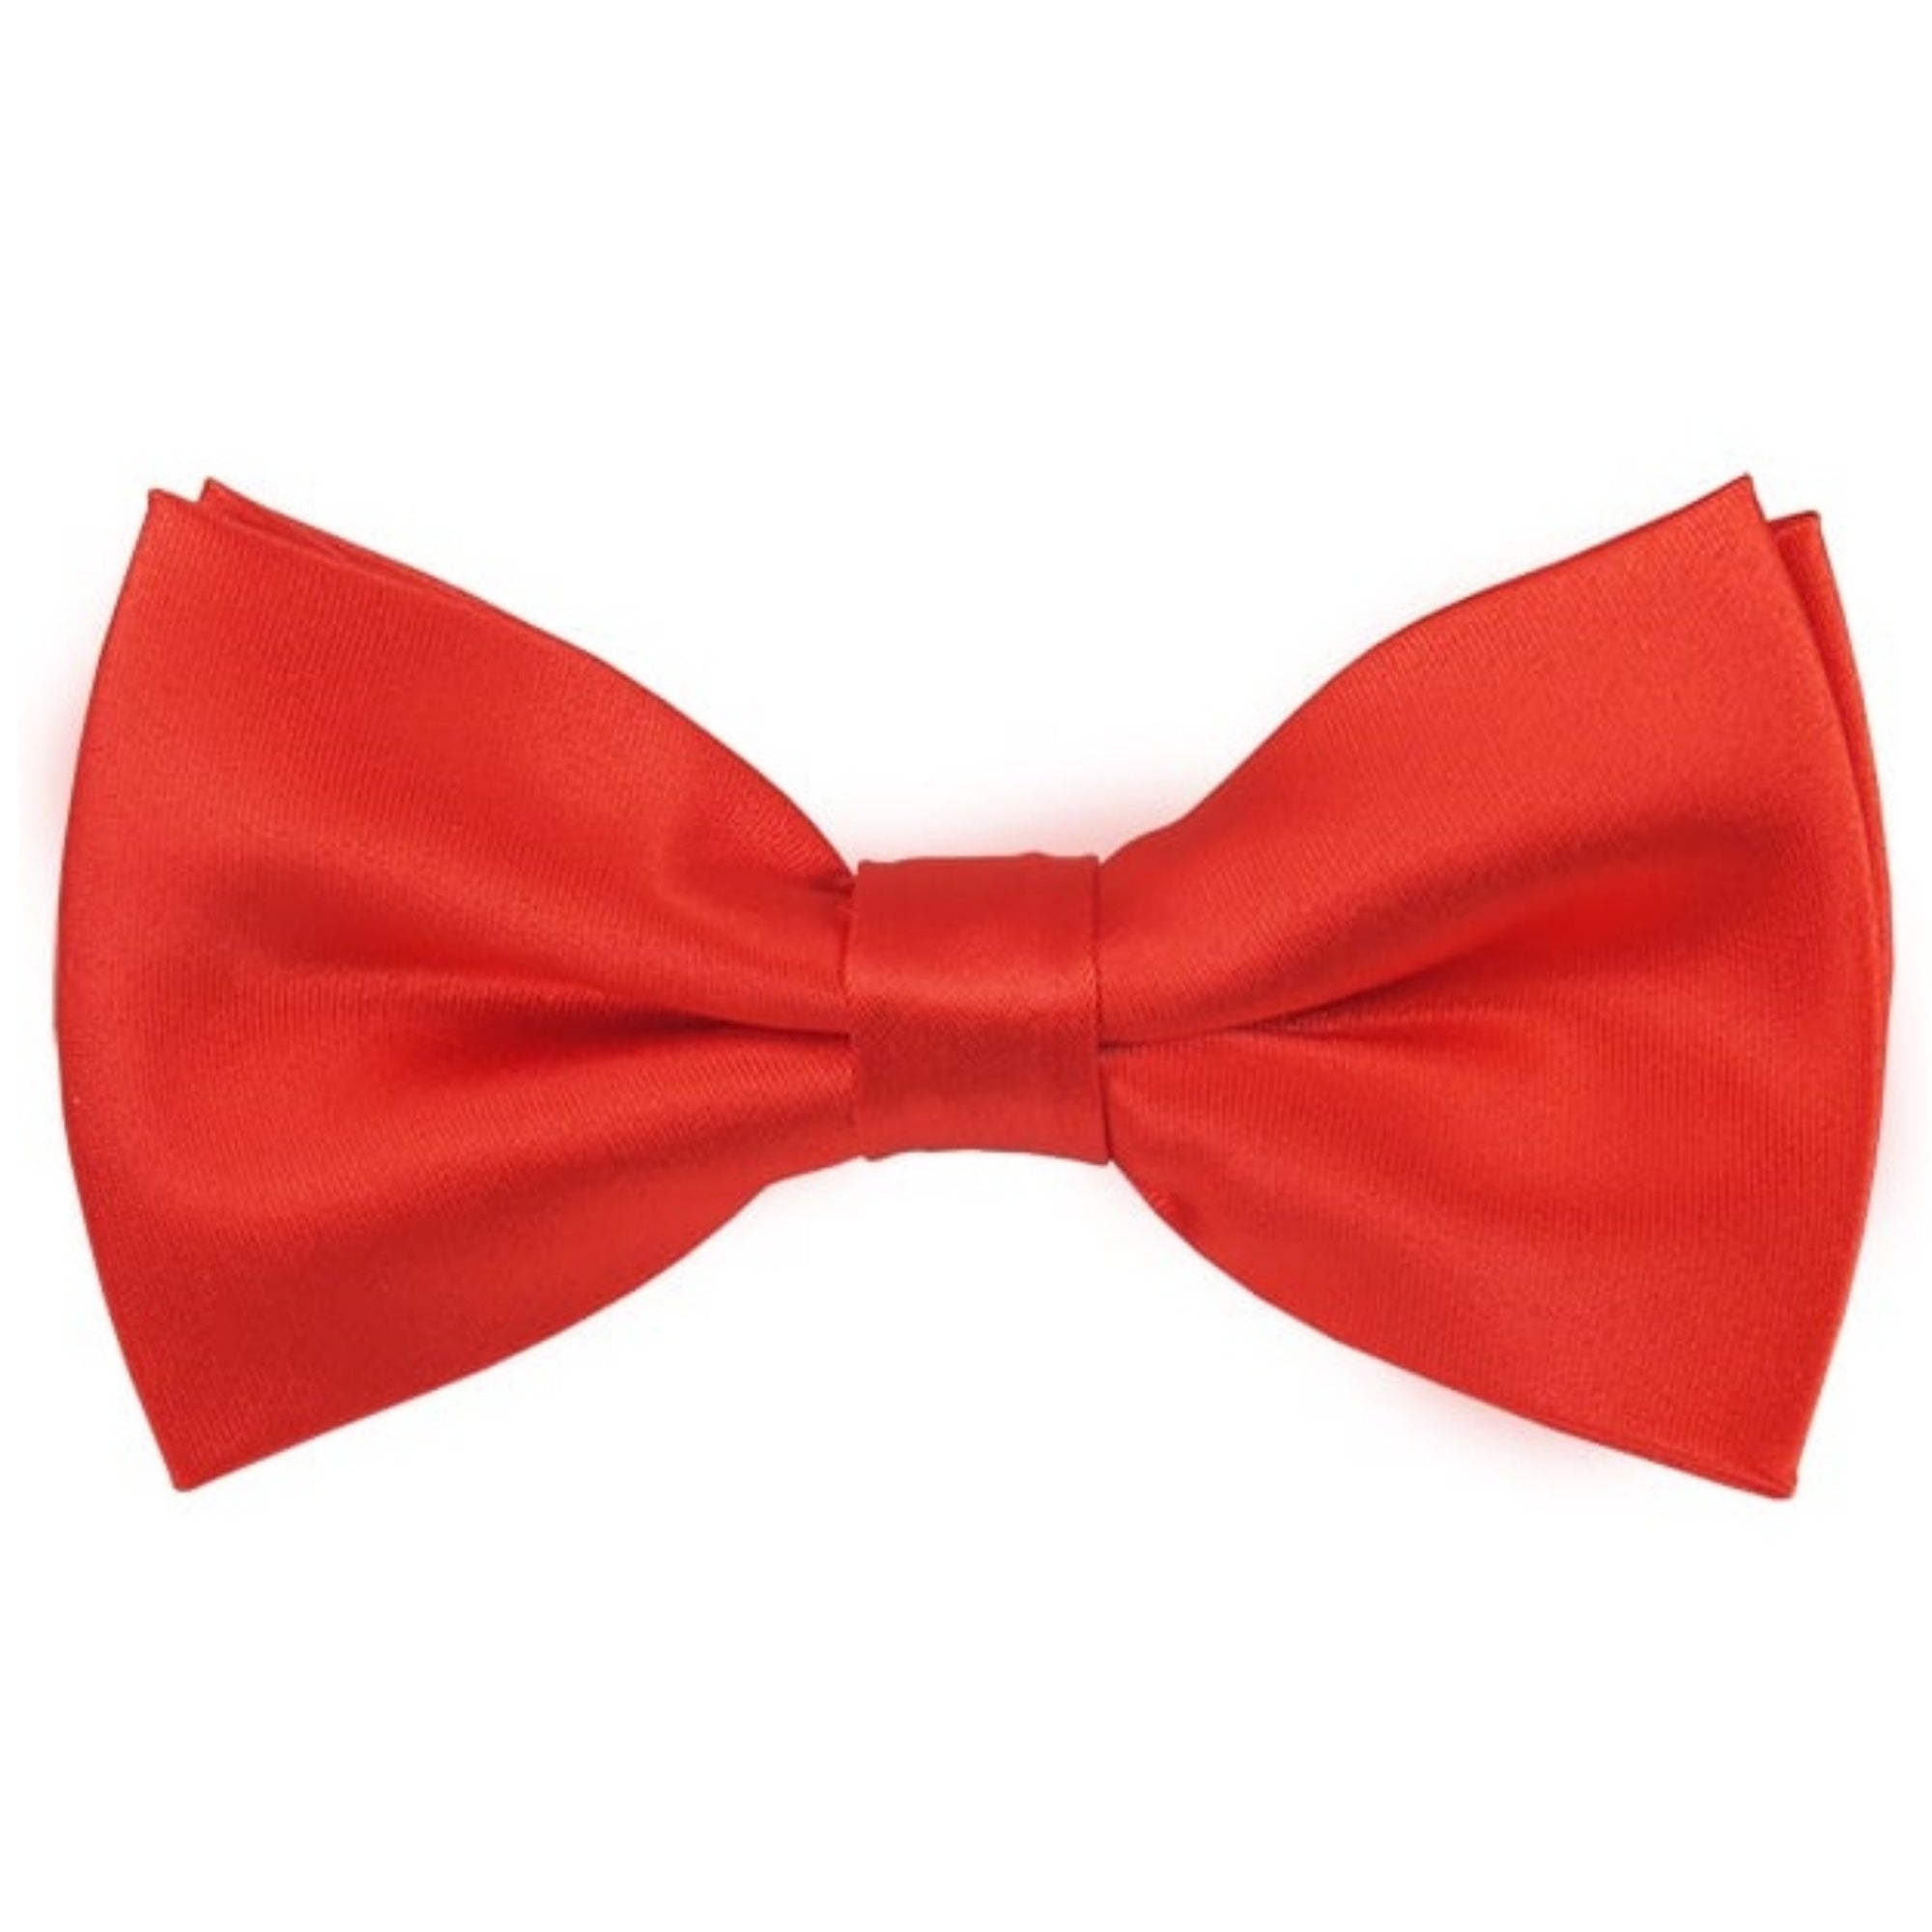 TheDapperTie Men's Solid Color 2.5 W And 4.5 L Inch Pre-Tied adjustable Bow Ties Men's Solid Color Bow Tie TheDapperTie Coral Red  